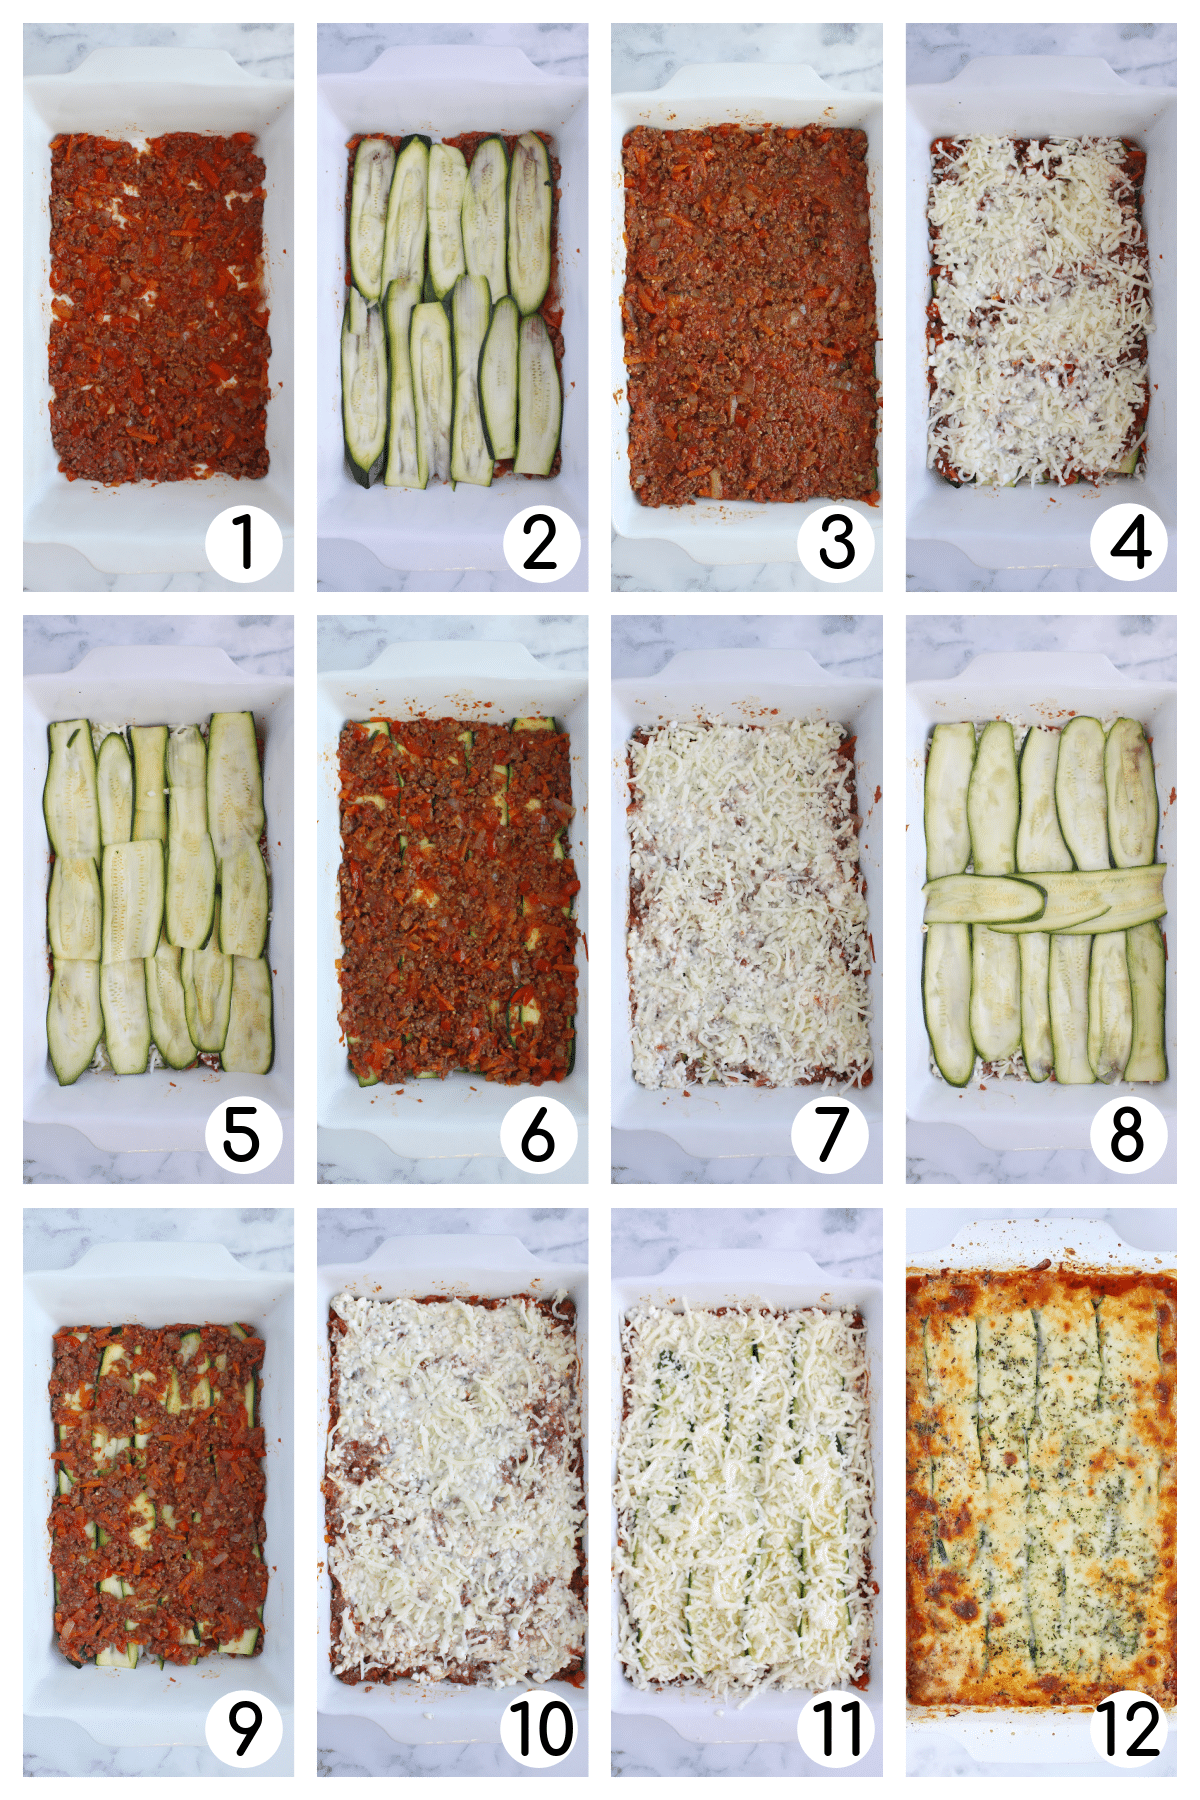 Step by step process shots showing how to make this zucchini lasagna recipe.